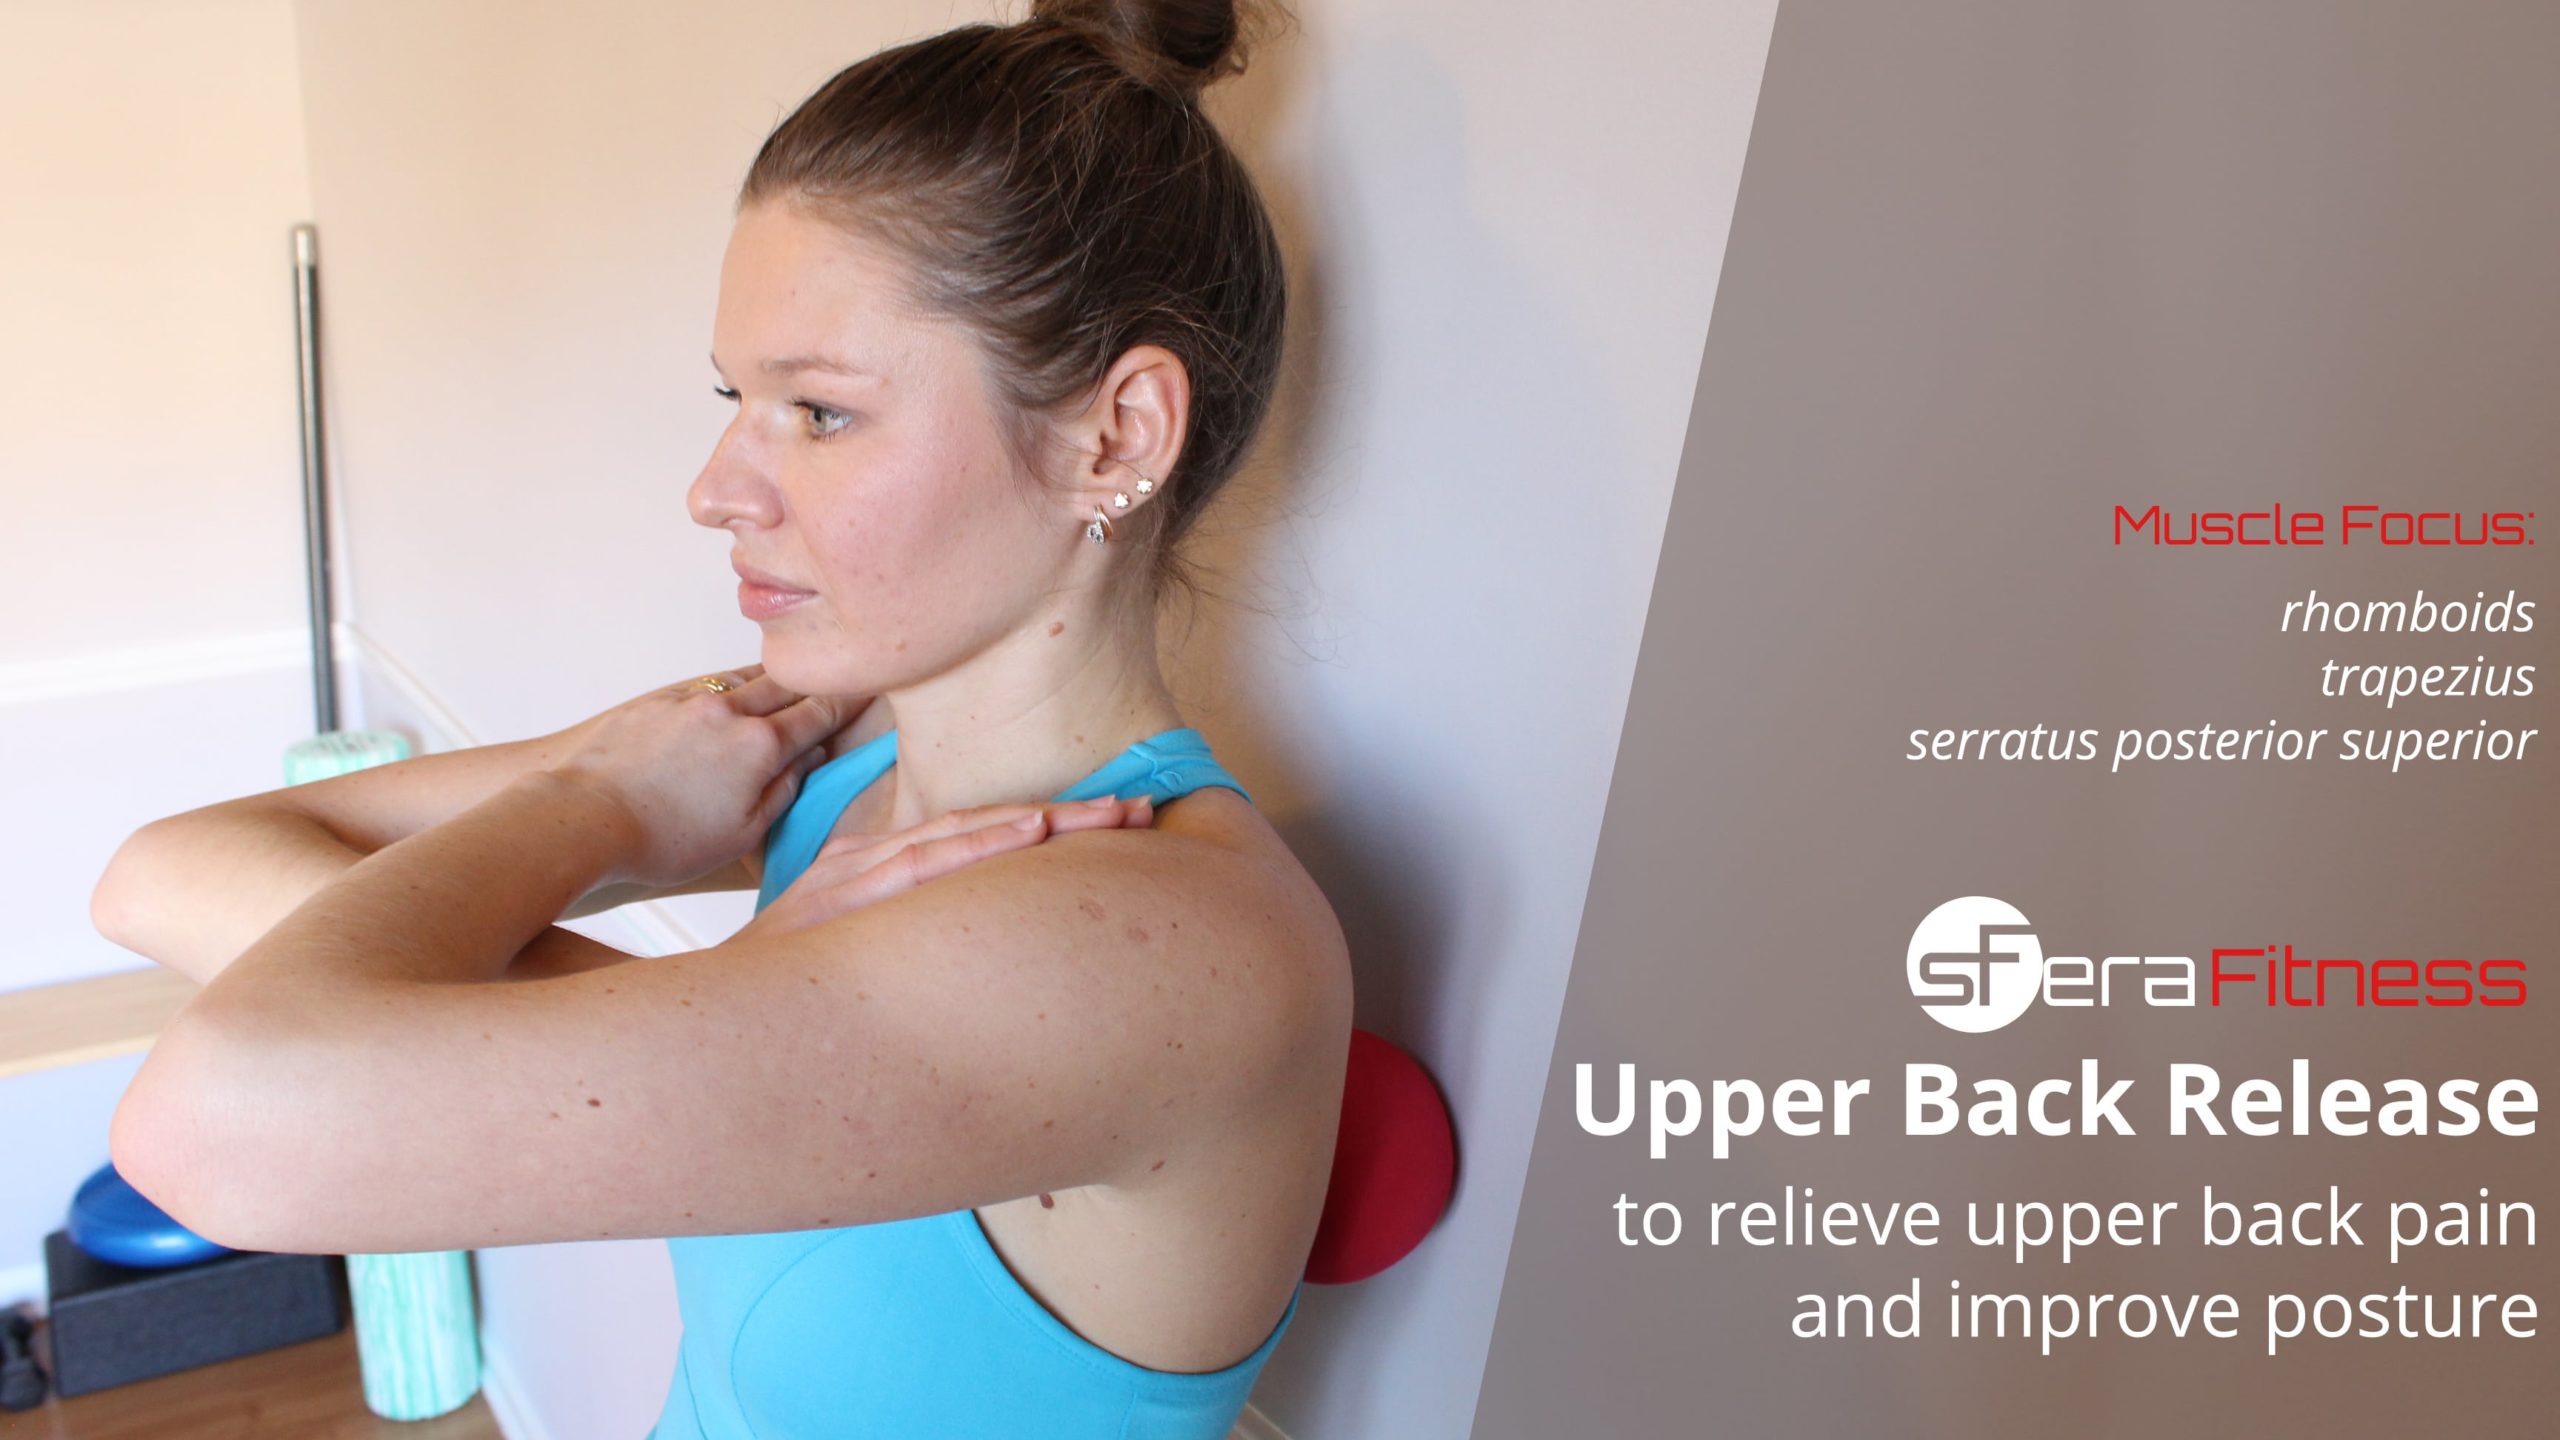 Upper Back Release to Relieve Upper Back Pain and Improve Posture